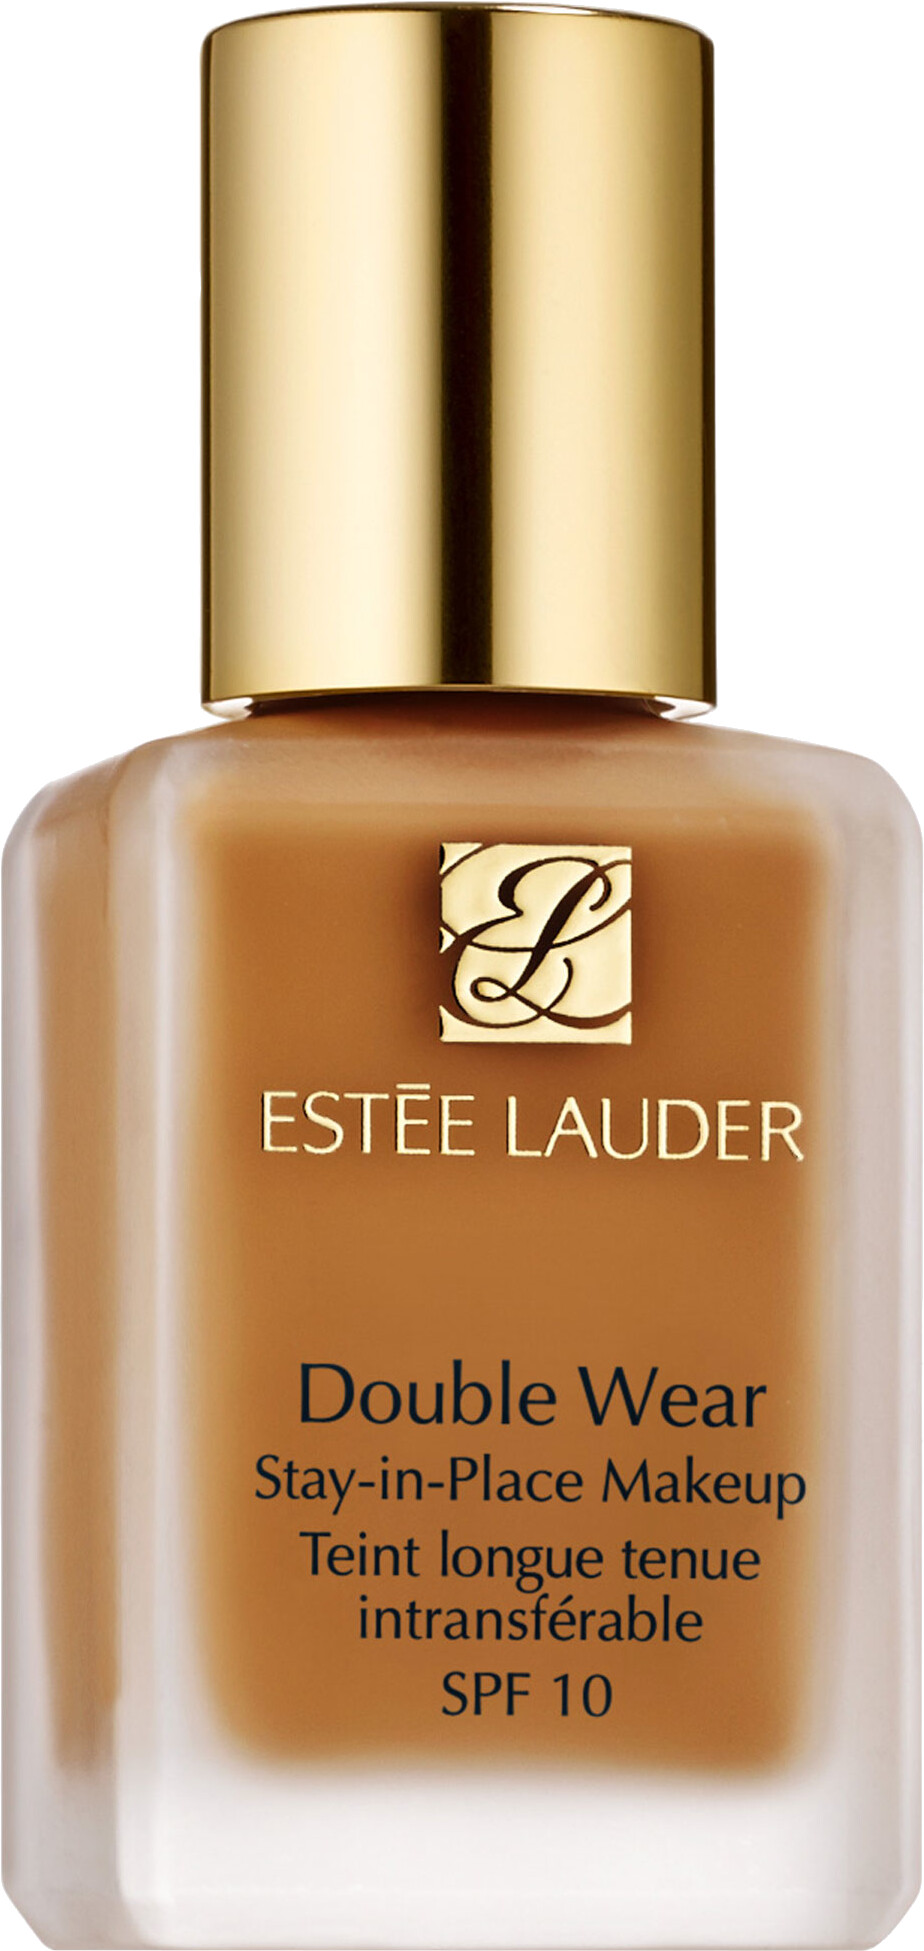 Estee Lauder Double Wear Stay-in-Place Foundation SPF10 30ml 5N1 - Rich Ginger